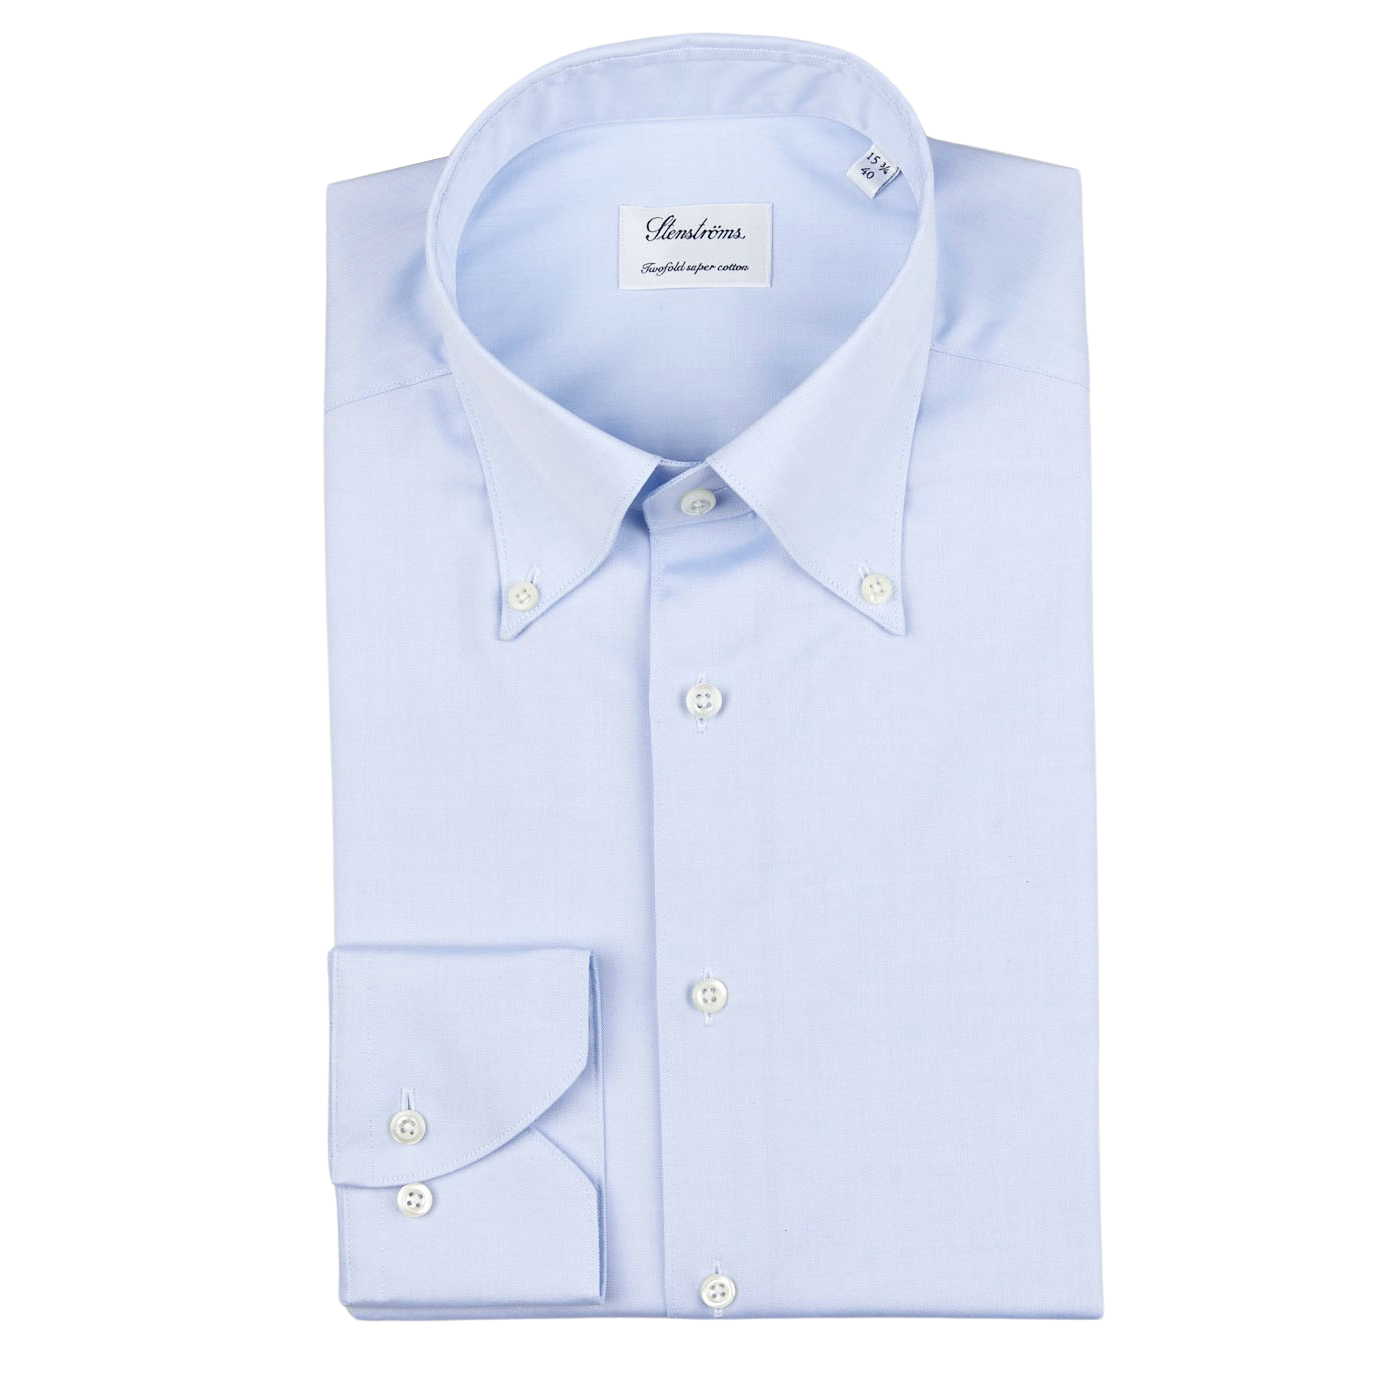 A Light Blue Cotton Oxford BD Fitted Body Stenströms Shirt with a button down collar.